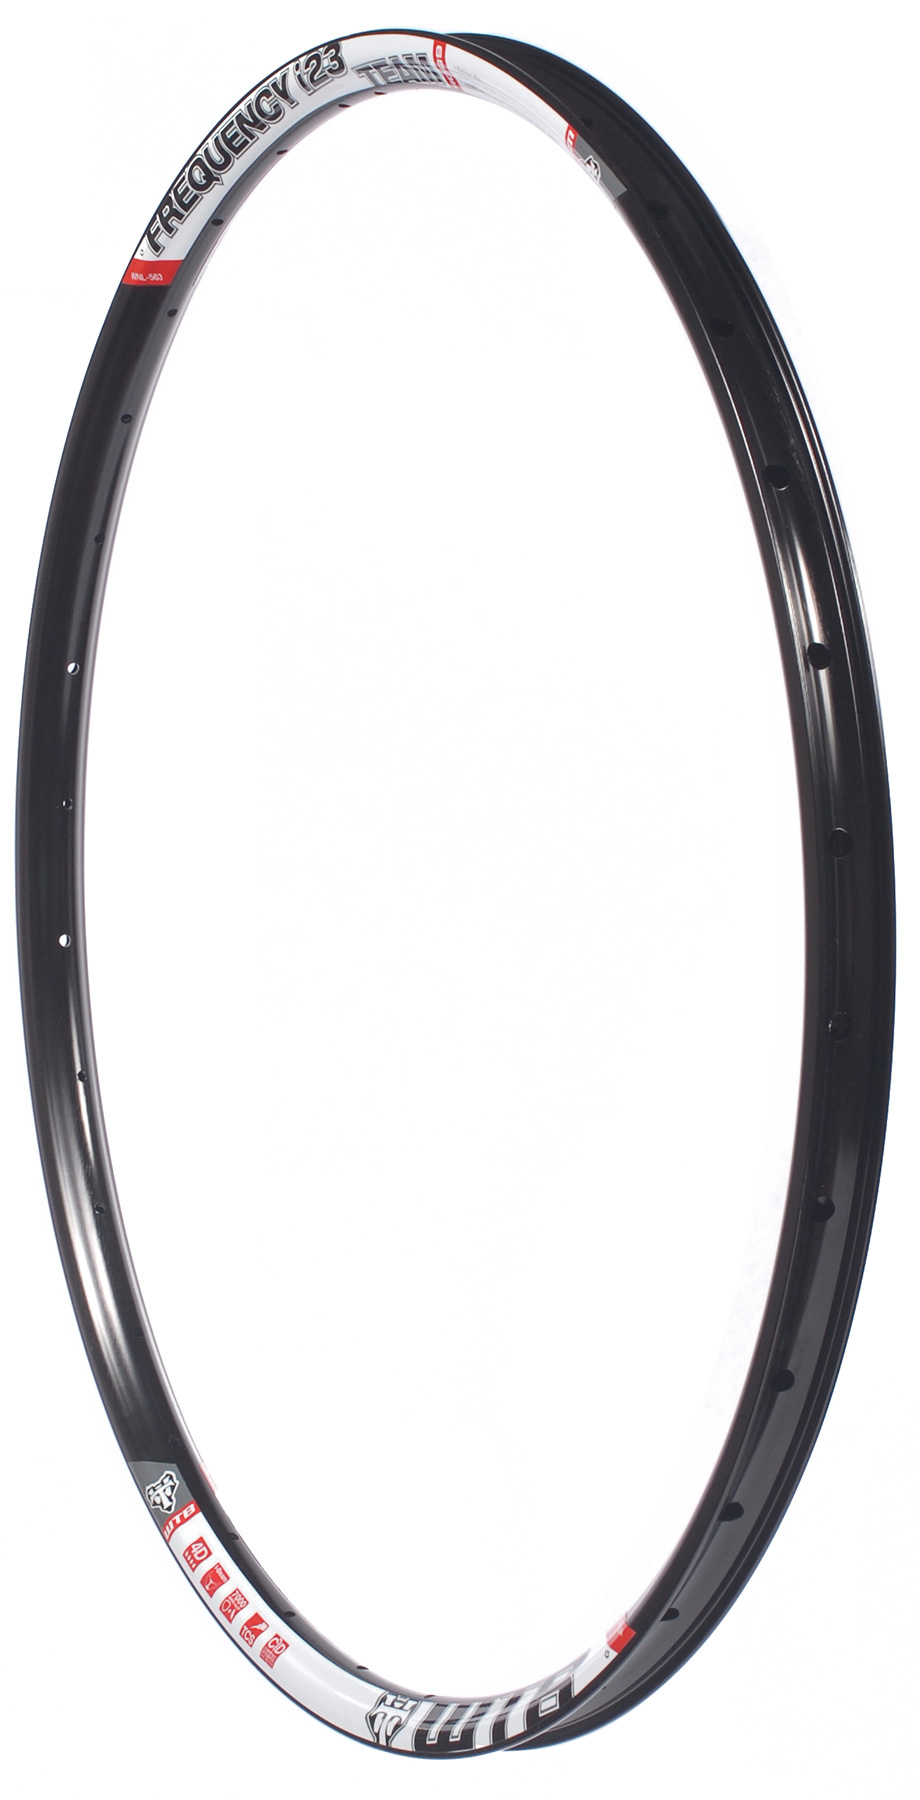 WTB Frequency TCS i19 Rim (29-inch) - Fullerton Bicycle Company